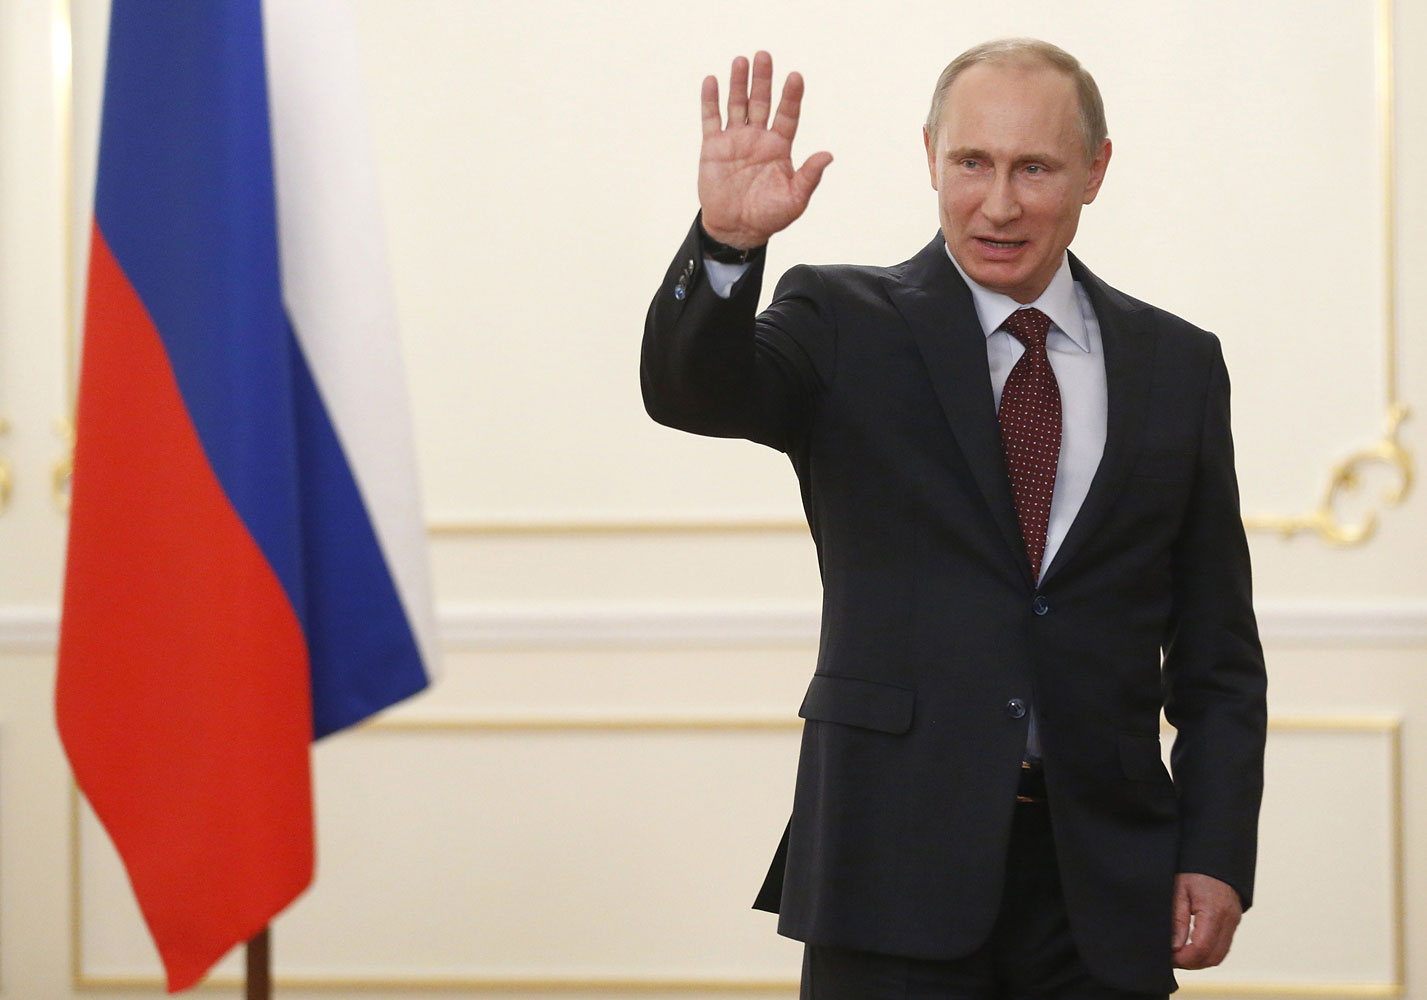 Vladimir Putin waves in his Novo-Ogaryovo residence outside Moscow, on April 18, 2014. (Maxim Shipenkov—AFP/Getty Images)